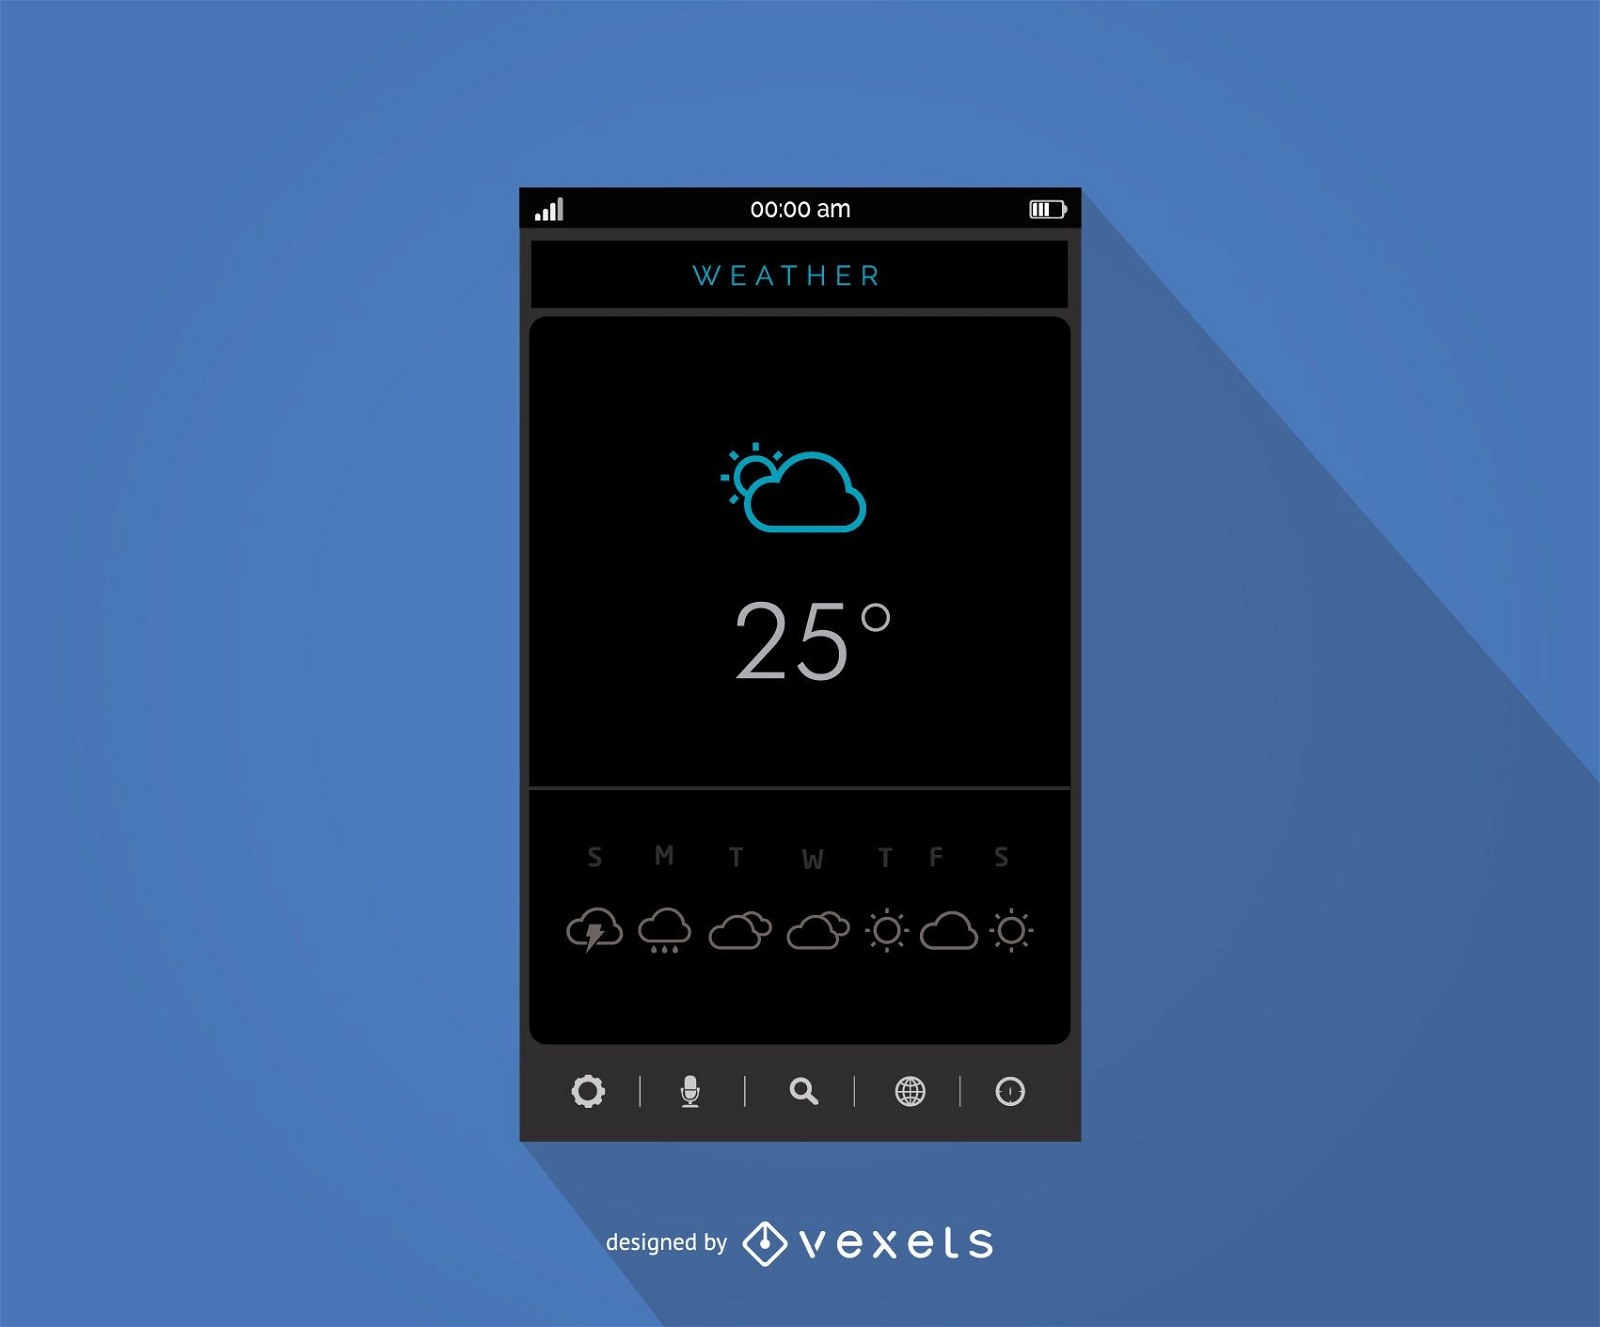 Mobile weather application interface design